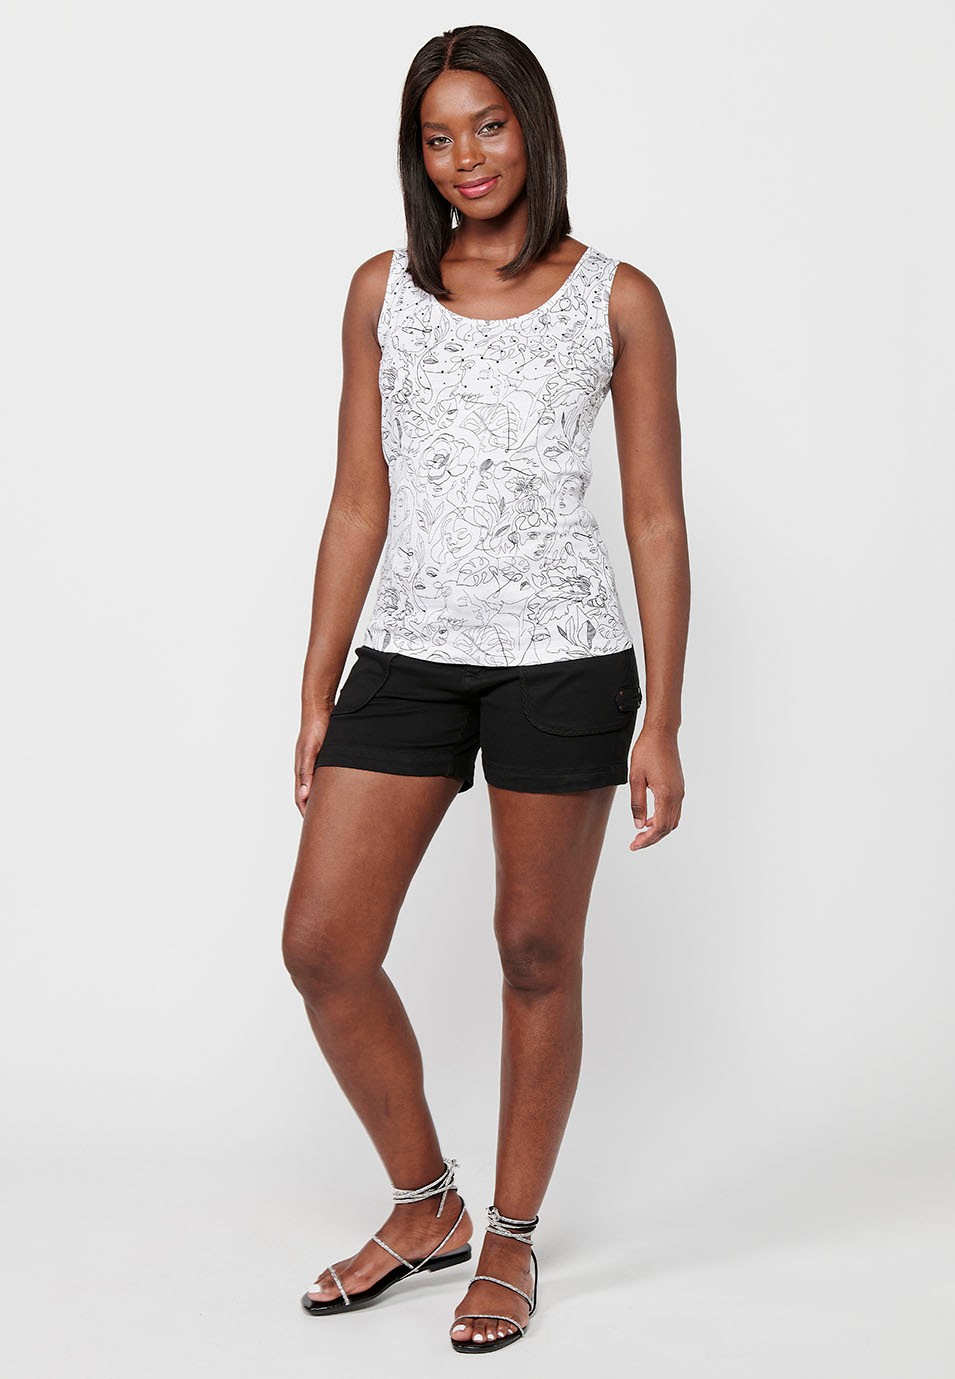 Cotton Sleeveless T-shirt with Round Neckline with White Floral Print for Women 4